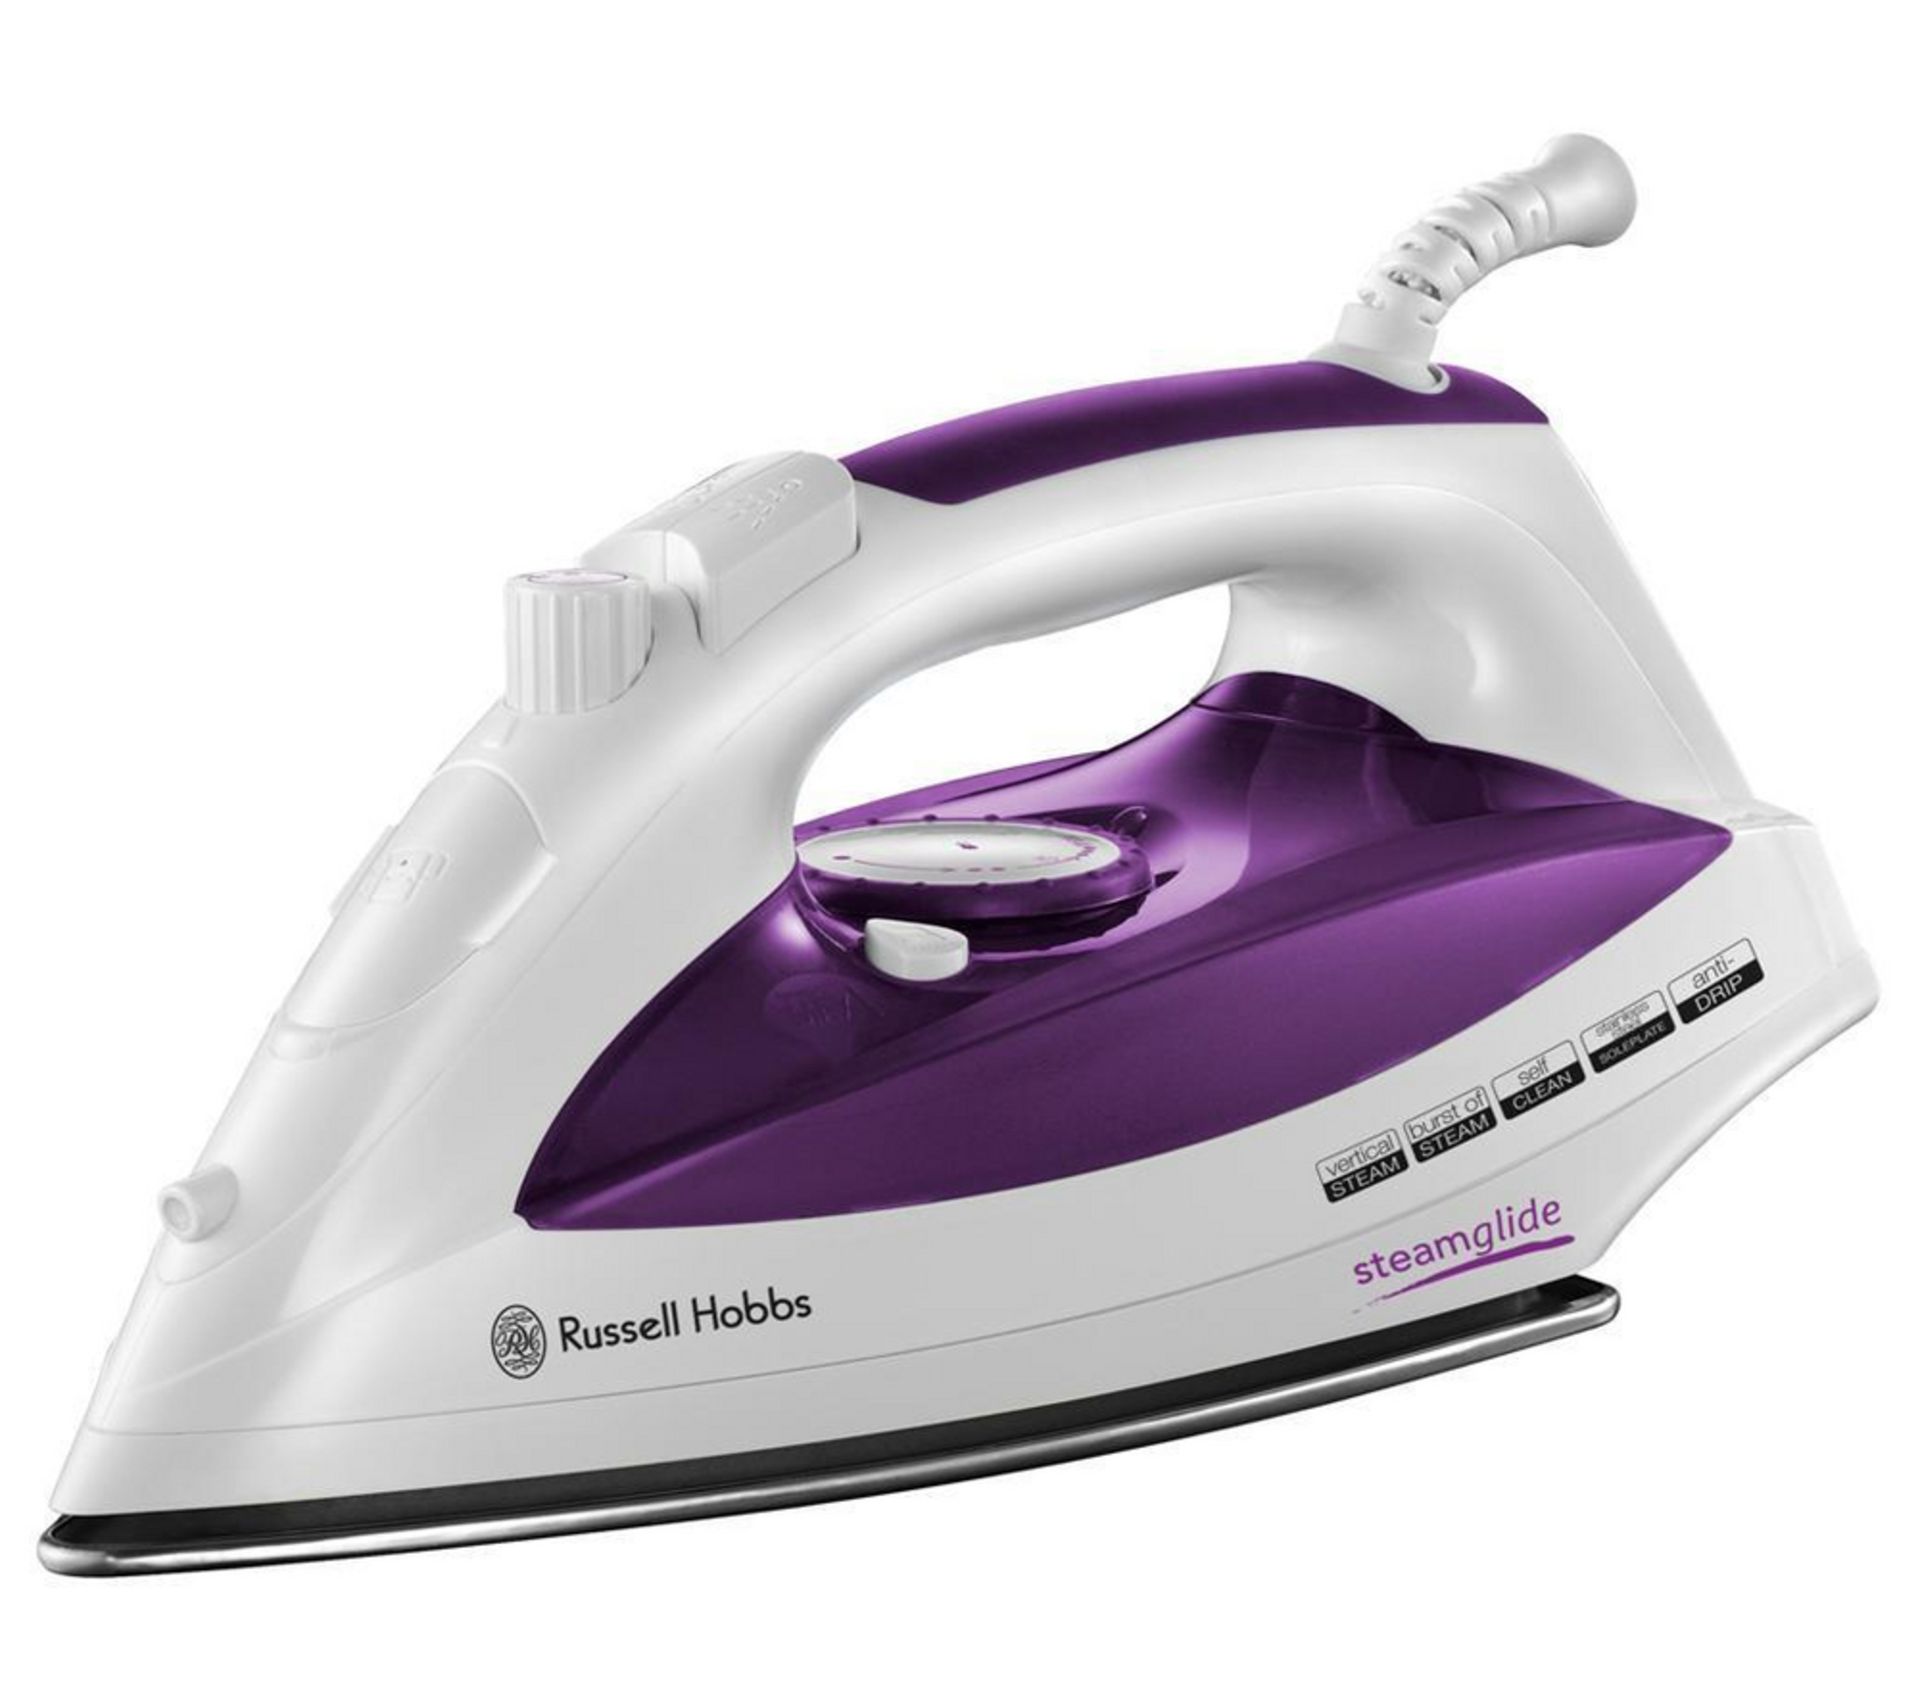 Brand New Russell Hobbs Steamglide Iron 2400W - Stainless Steel Plate - Self Clean- Anti Drip - ISP - Image 4 of 4